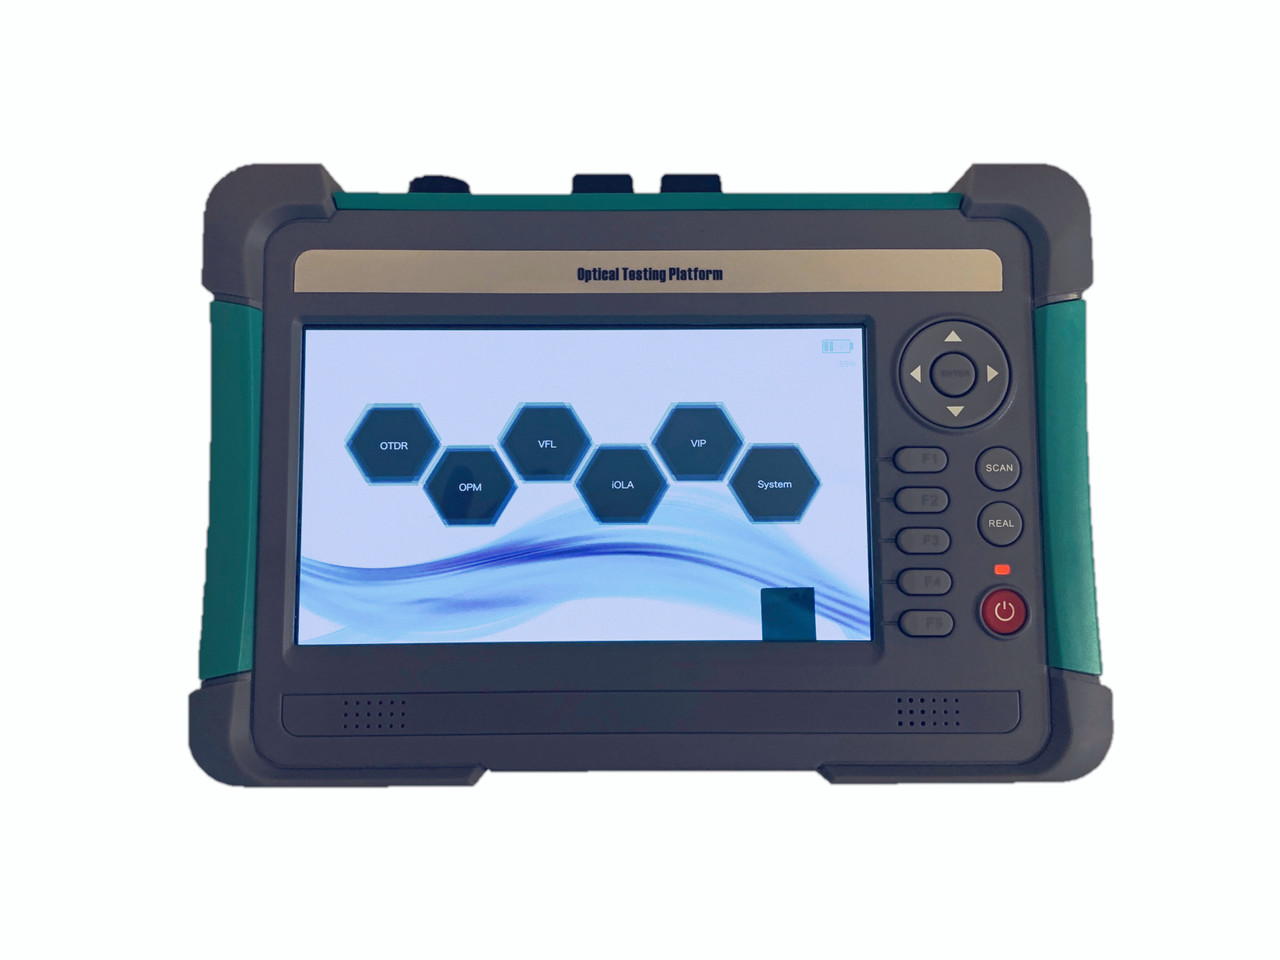 OTDR-7001 - Optical Time Domain Reflectometer - includes Power Meter and VFL 1mW in one device, Ethernet, Bluetooth and USB connectivity